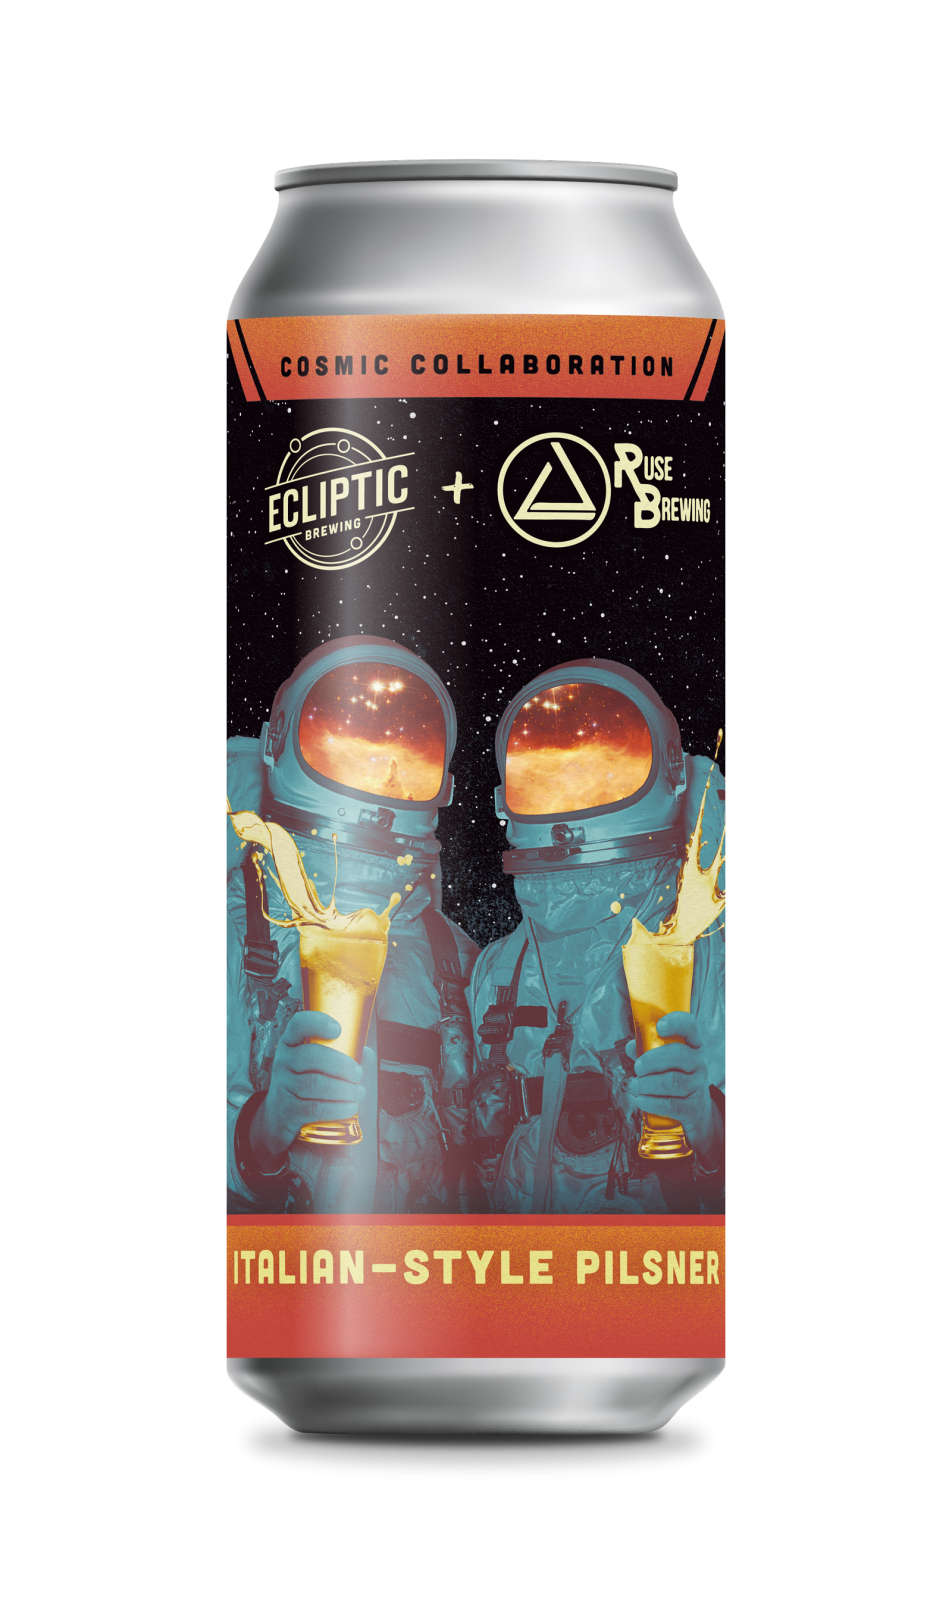 Ecliptic Brewing / Ruse Brewing Italian-style Pilsner